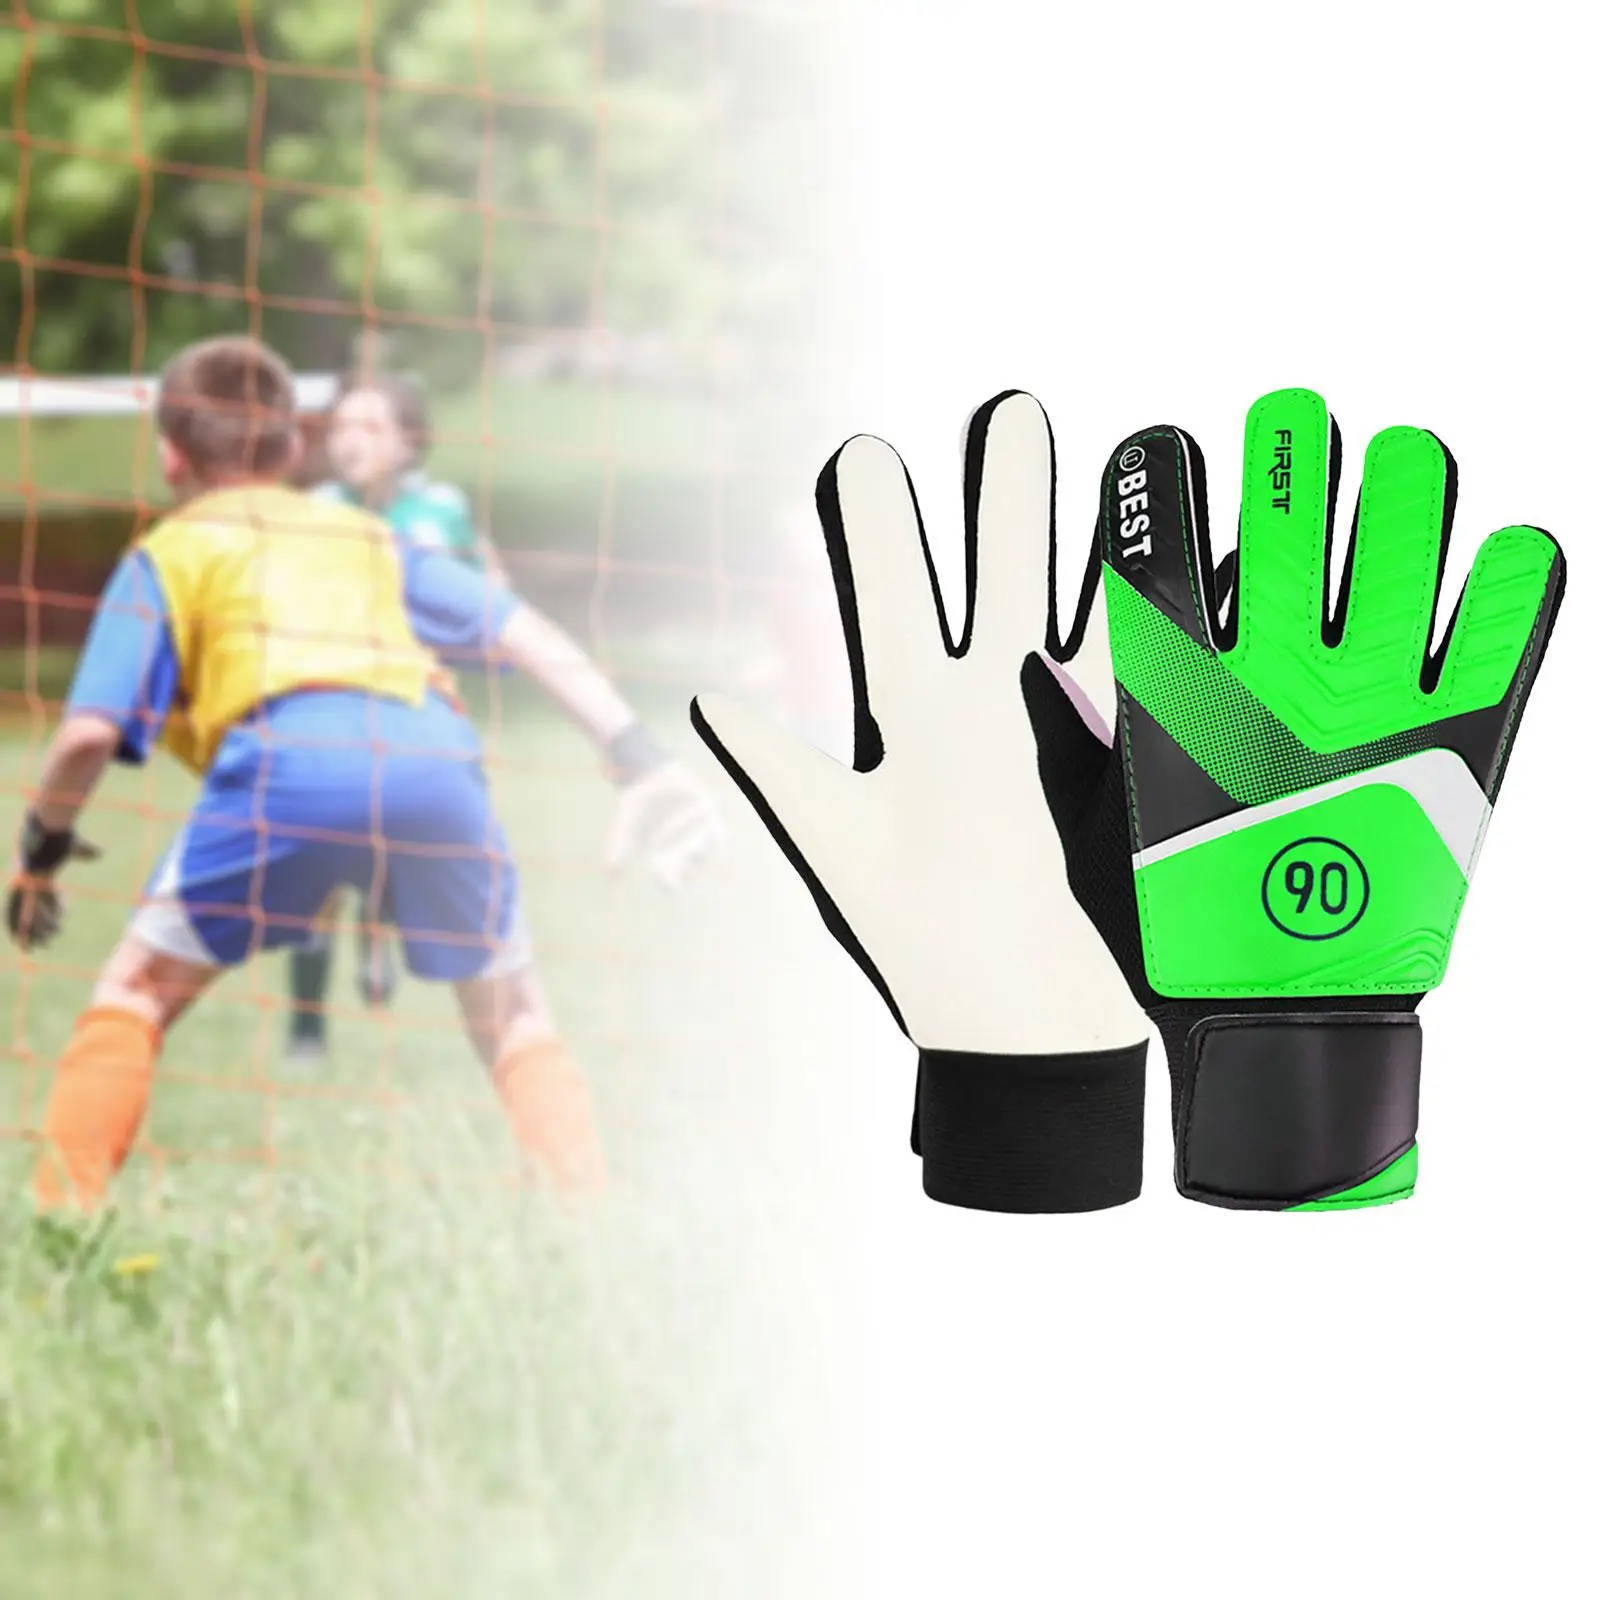 Soccer Goalkeeper Gloves Finger Protection Nonslip Training Match Strong Grip Comfortable Professional for Boys Girls Latex Palm